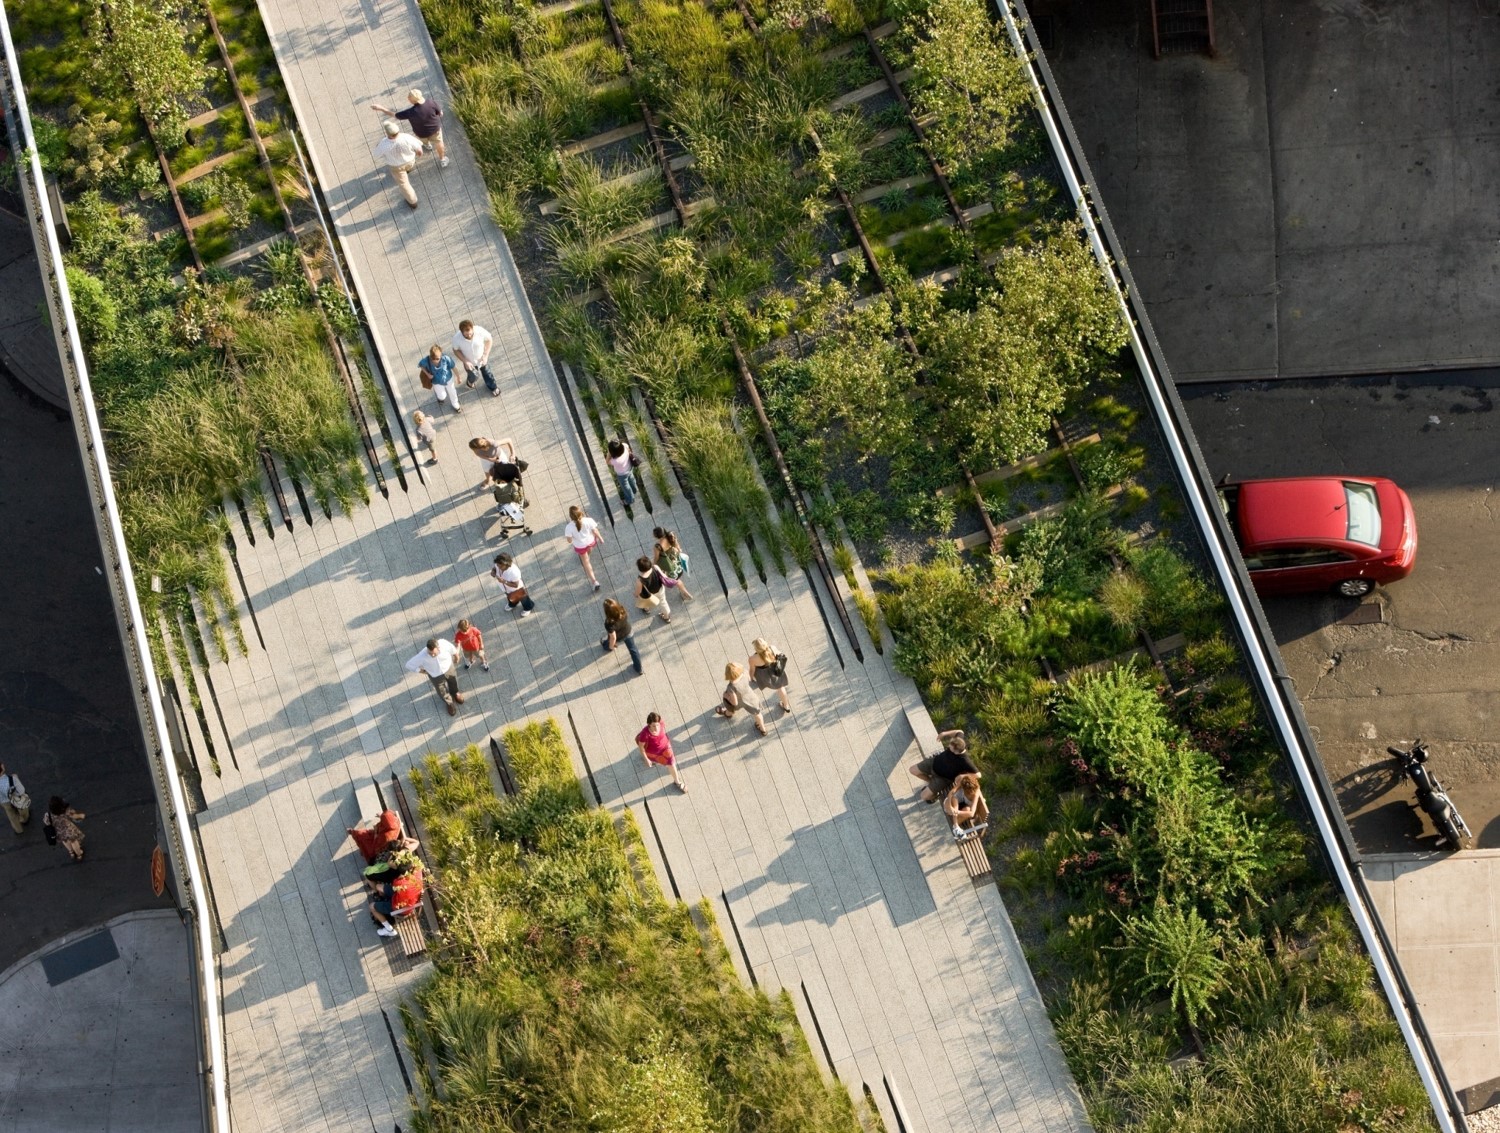 News Release: The High Line’s Robert Hammond Returns to Minneapolis for the Next Generation of Parks™ Event Series, March 21, 2019, 7pm at the Walker Art Center